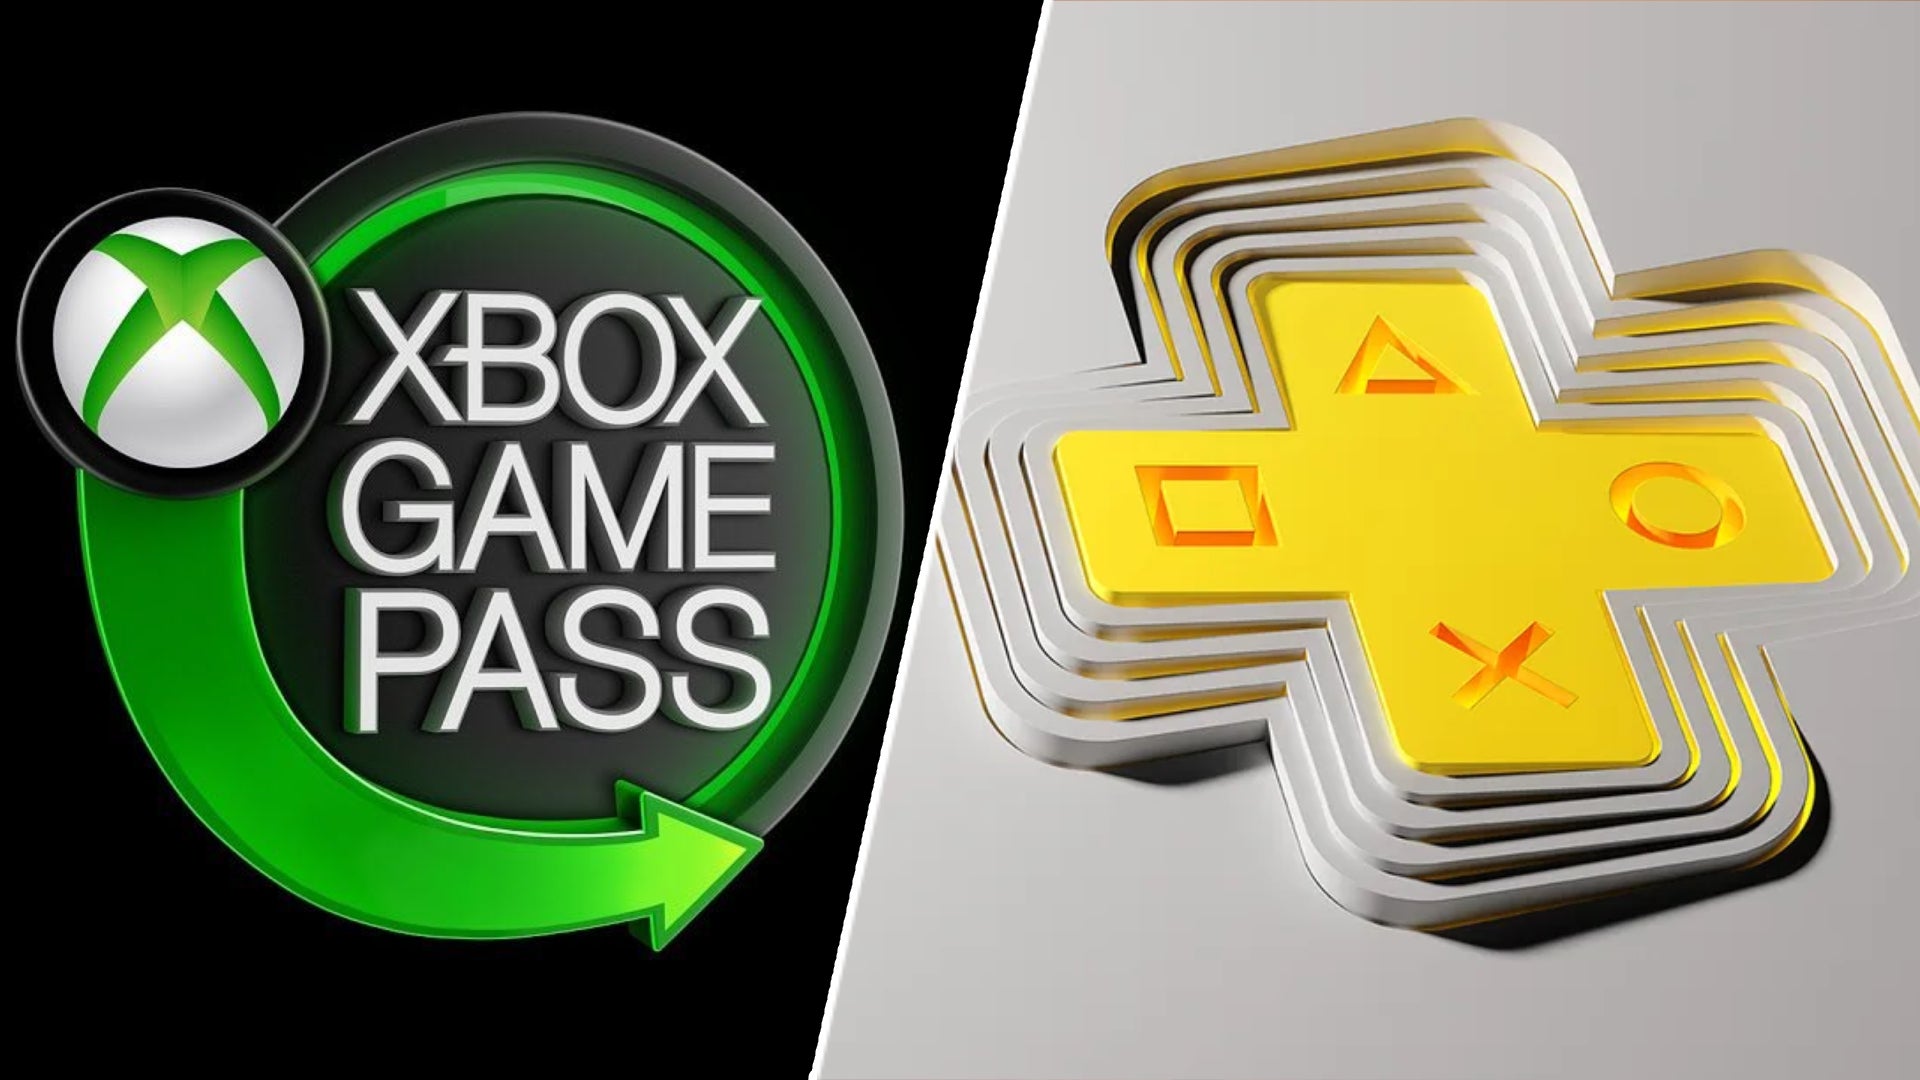 Image for PlayStation Plus Premium: Is it really an Xbox Game Pass rival?